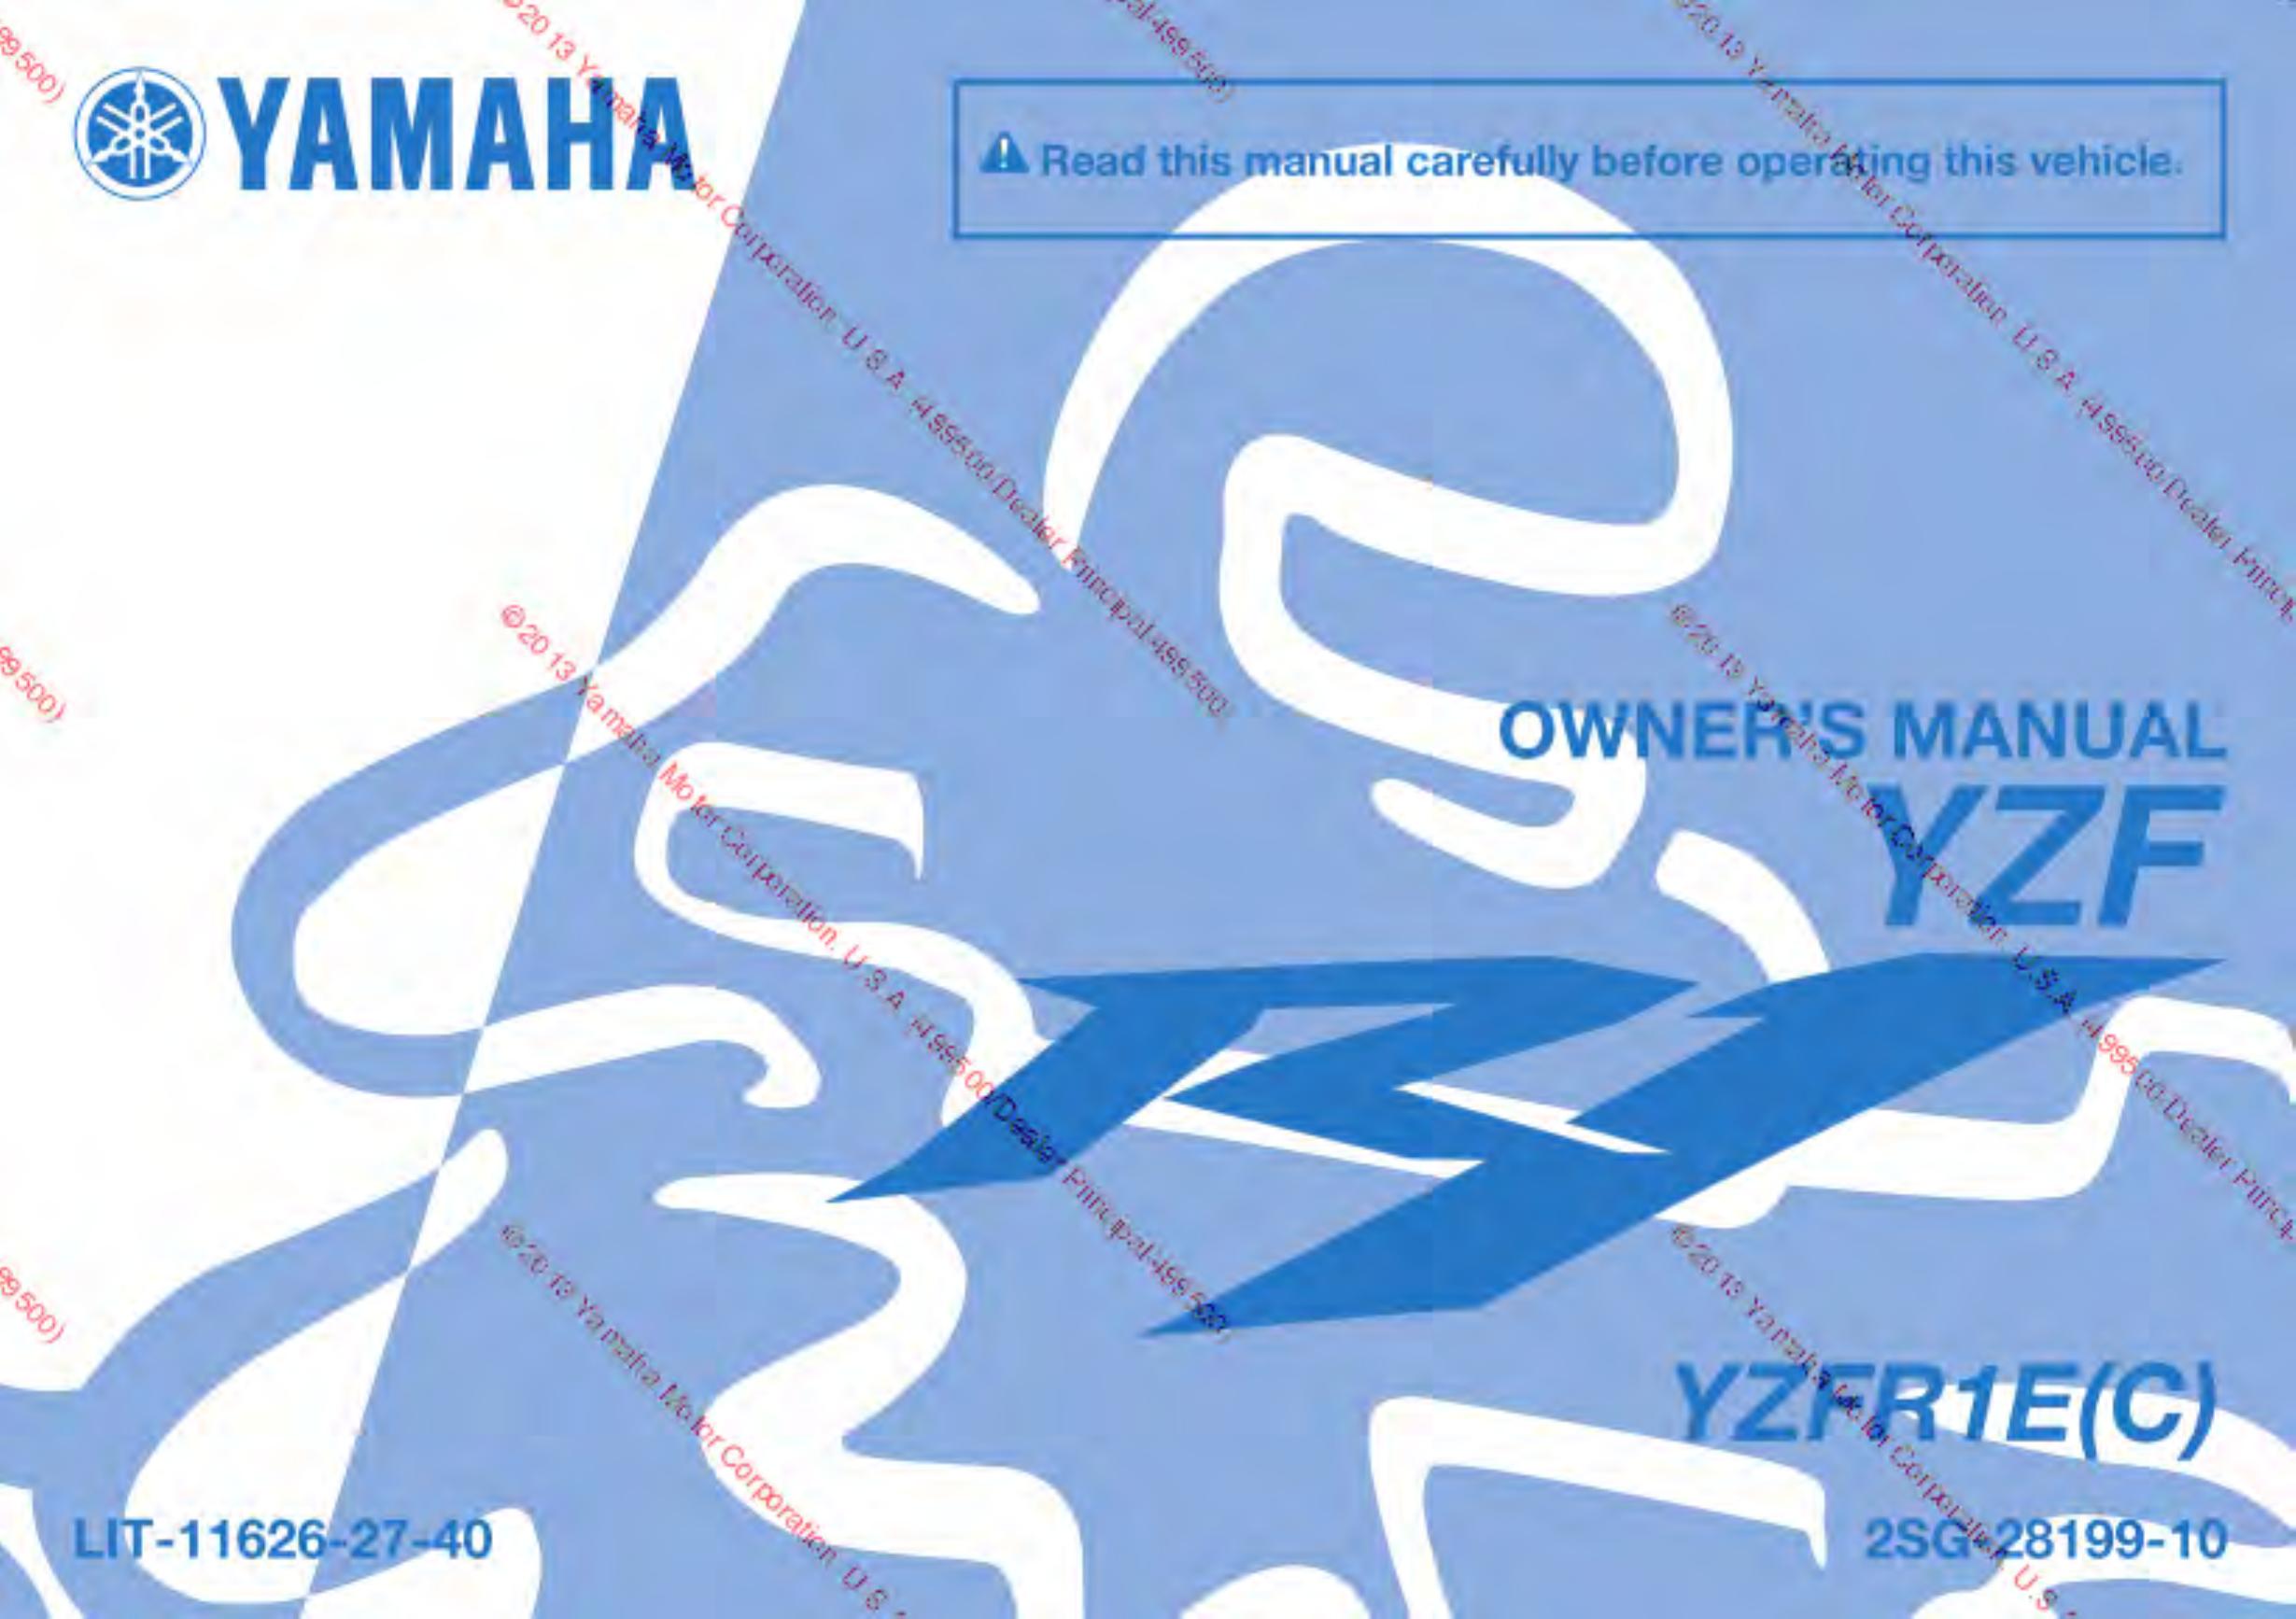 Yamaha YZFR1E(C) Mobility Scooter User Manual